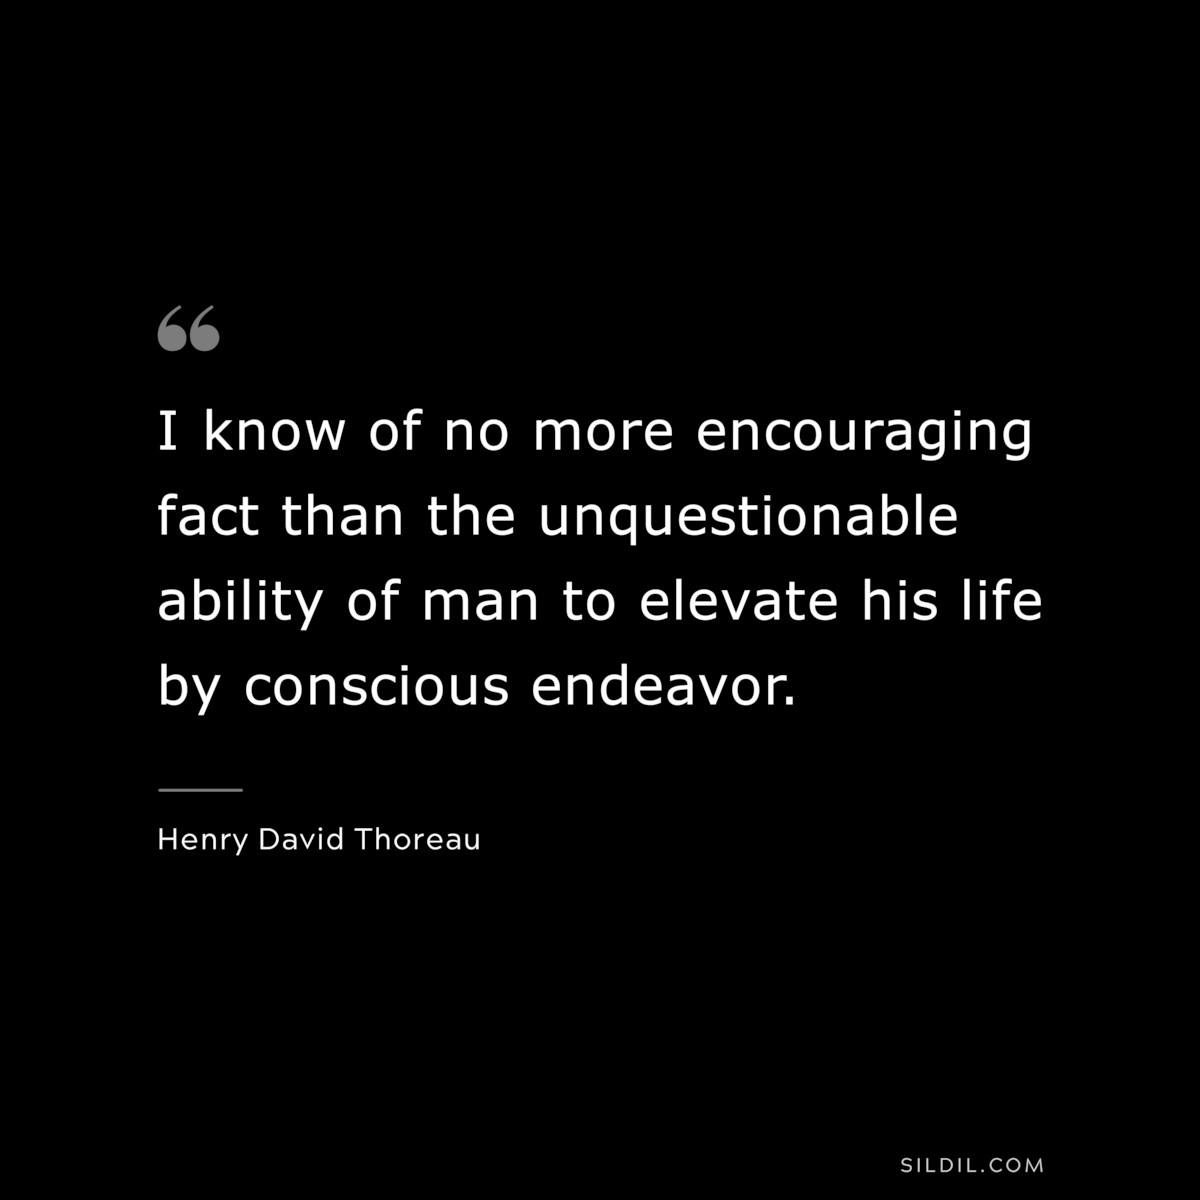 I know of no more encouraging fact than the unquestionable ability of man to elevate his life by conscious endeavor. — Henry David Thoreau